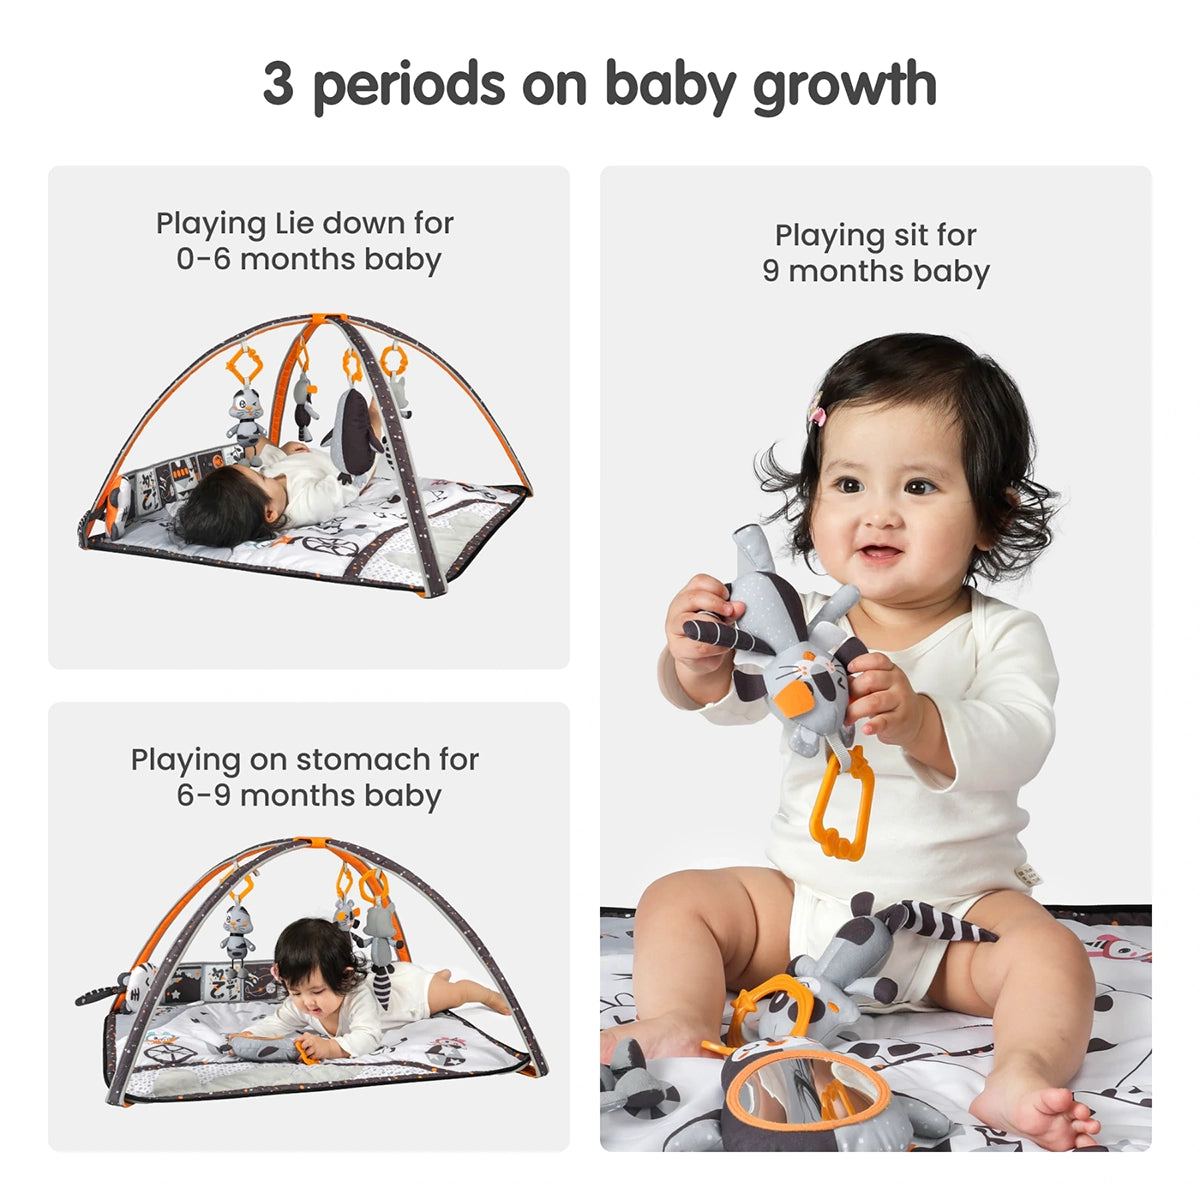 Baby black and white play gym mat with soft book 3 periods on baby growth 